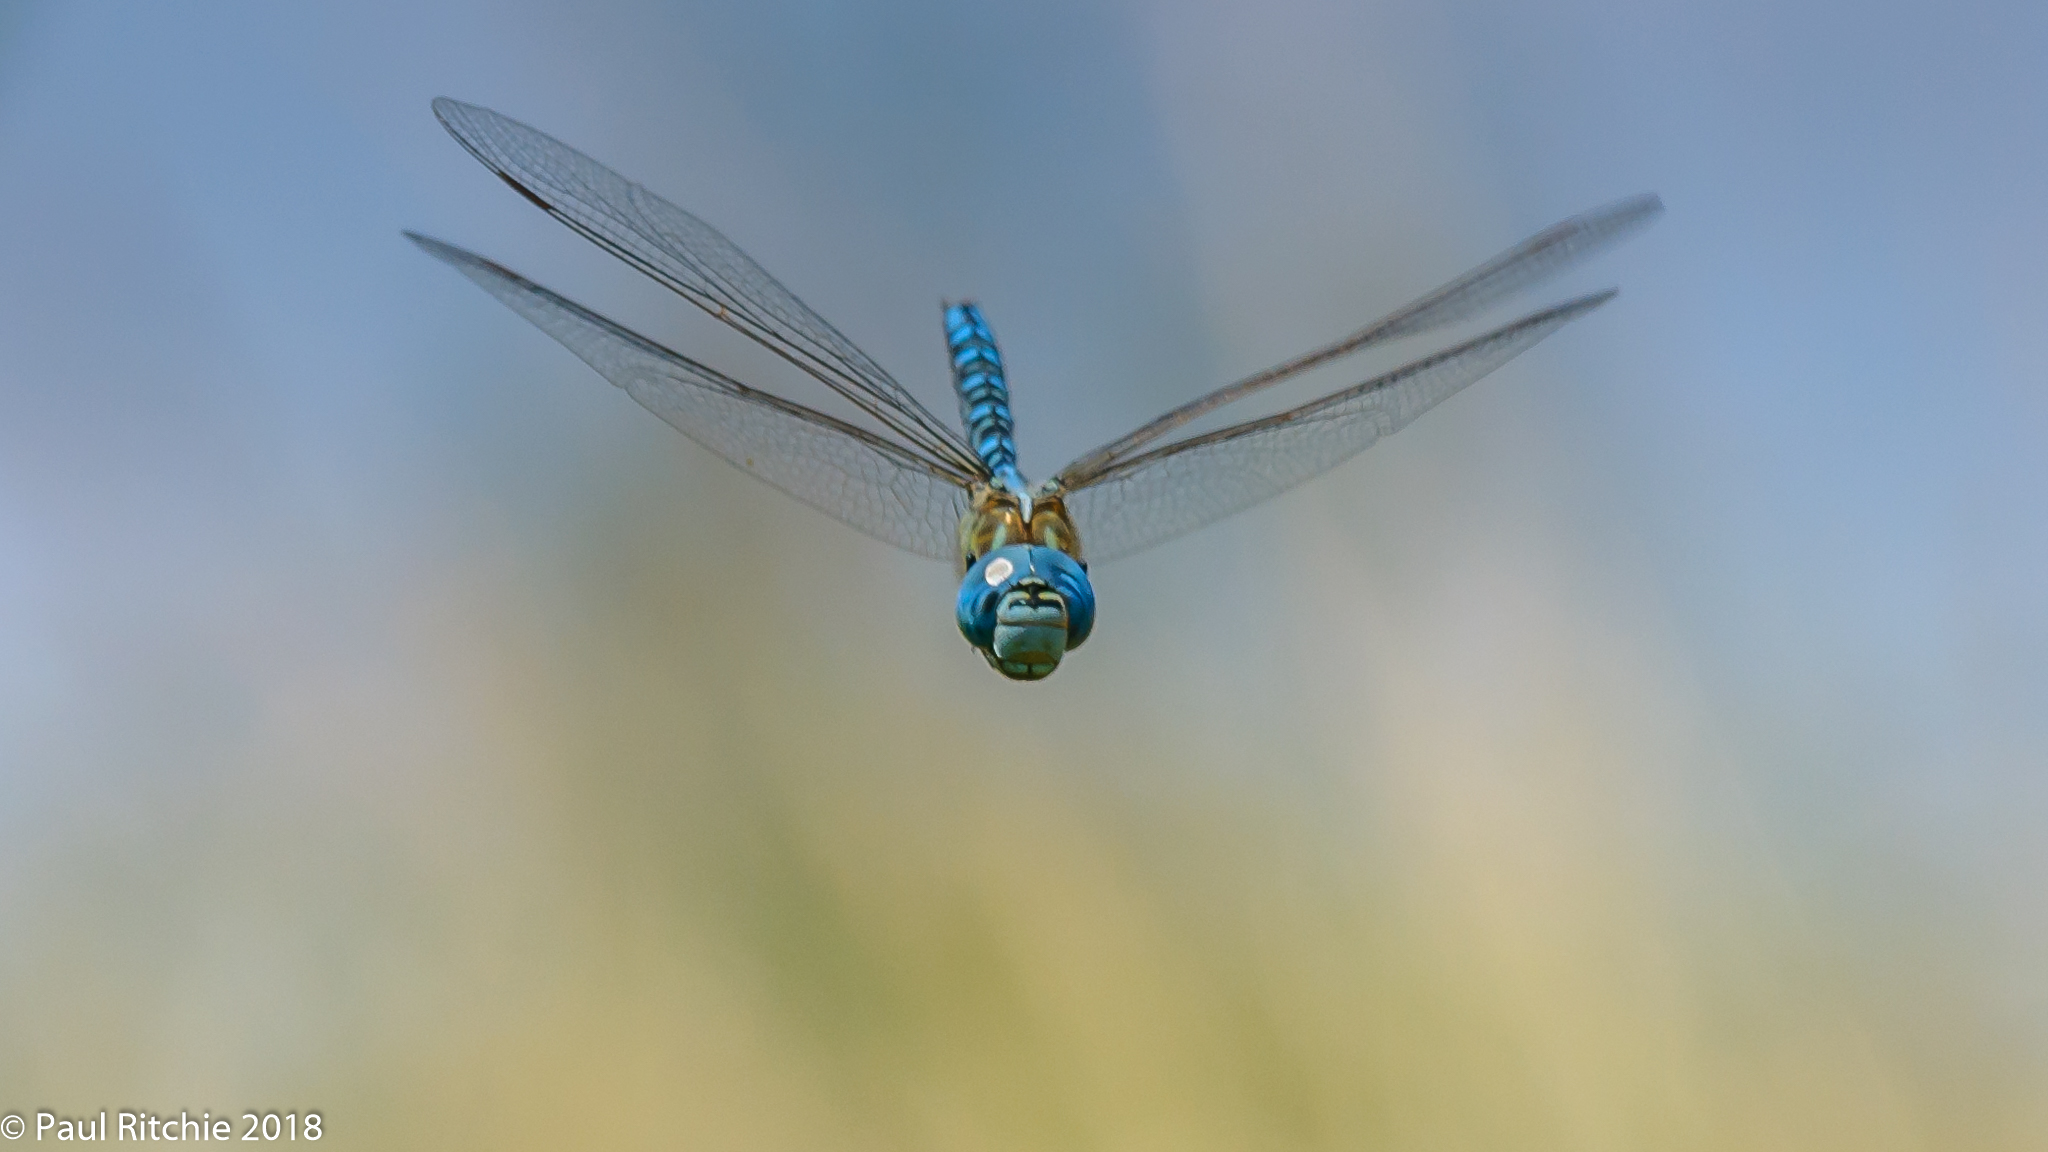 Blue-eyed (Southern Migrant) Hawker (Aeshna affinis) - male on patrol